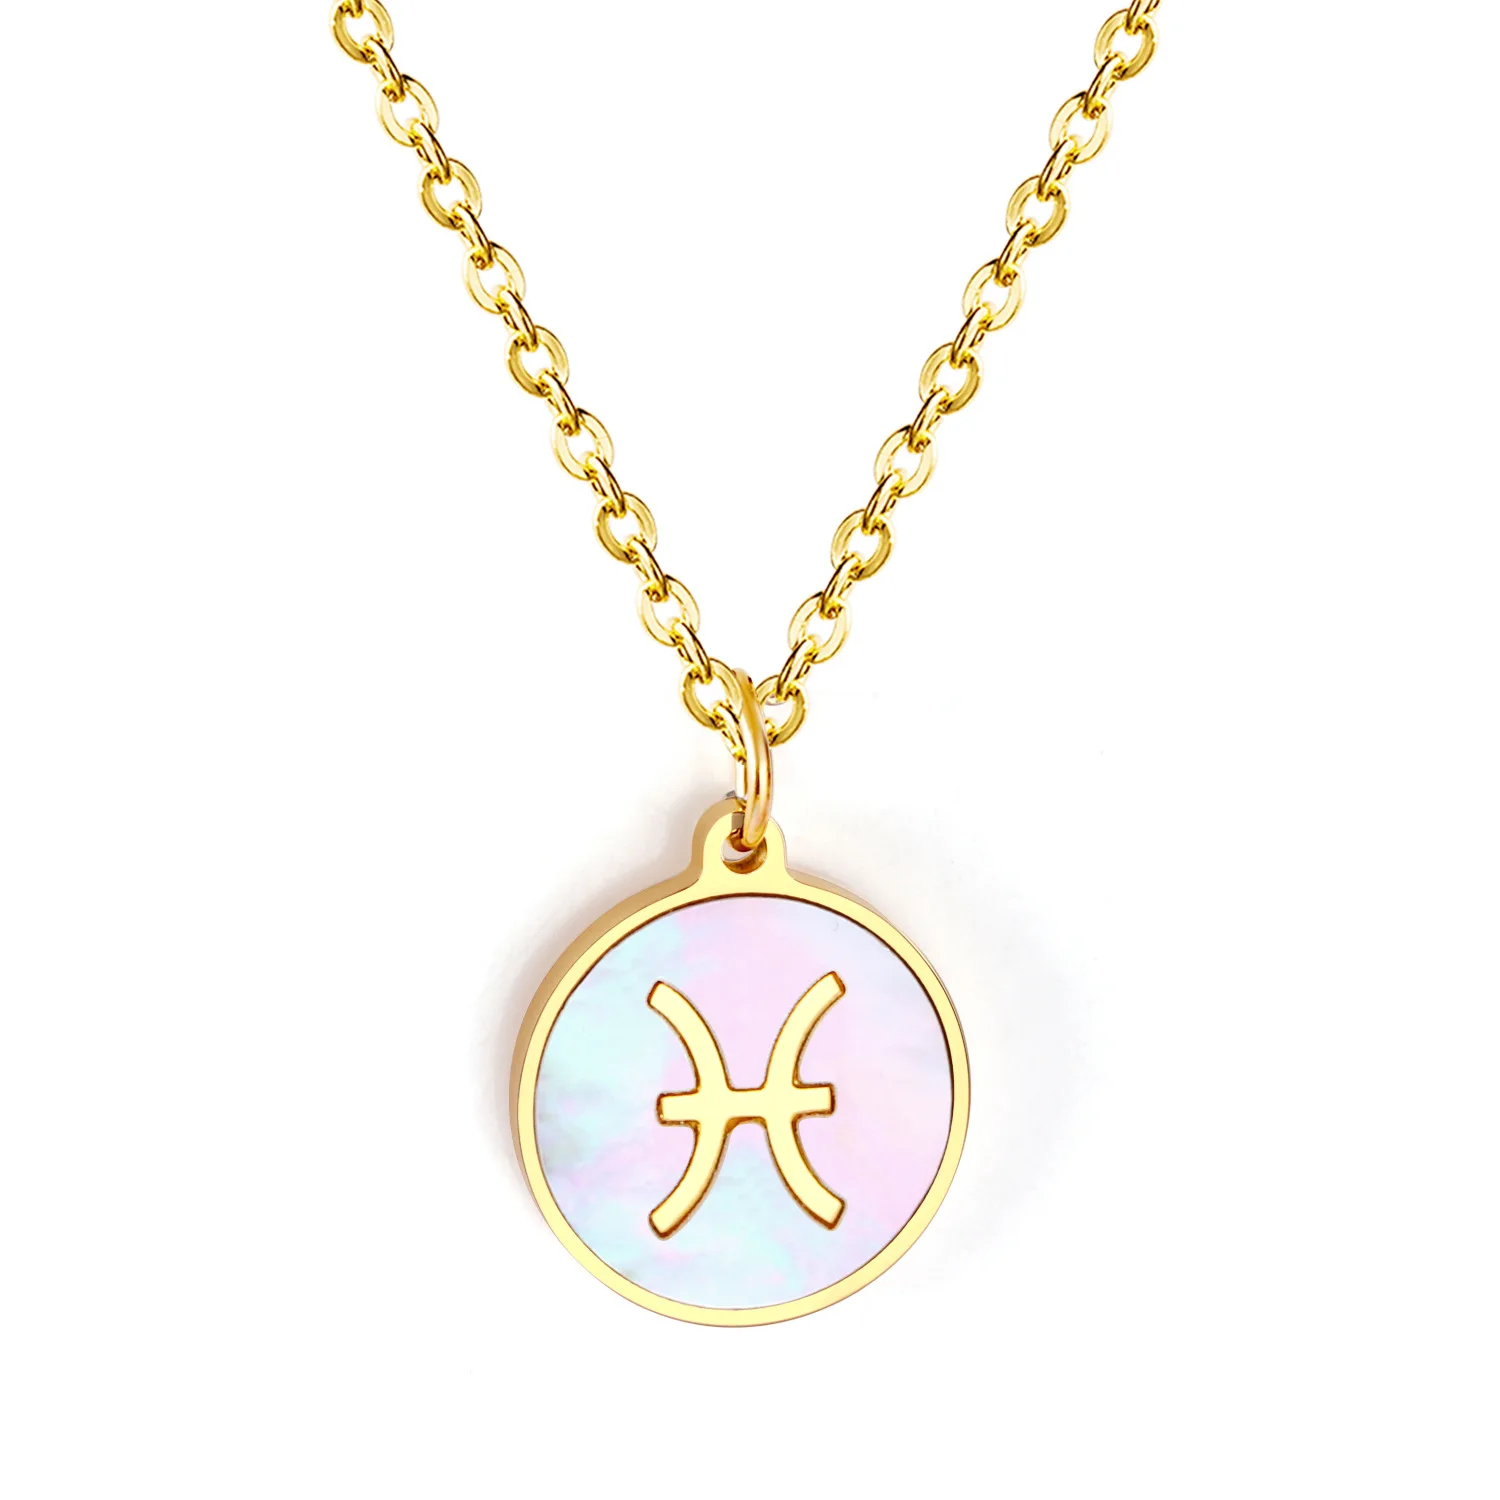 

MICCI Wholesale 12 Constellation Symbol Star Shell Jewelry 18k Gold Horoscope Round Zodiac Sign Disc Coin Pendant Necklace